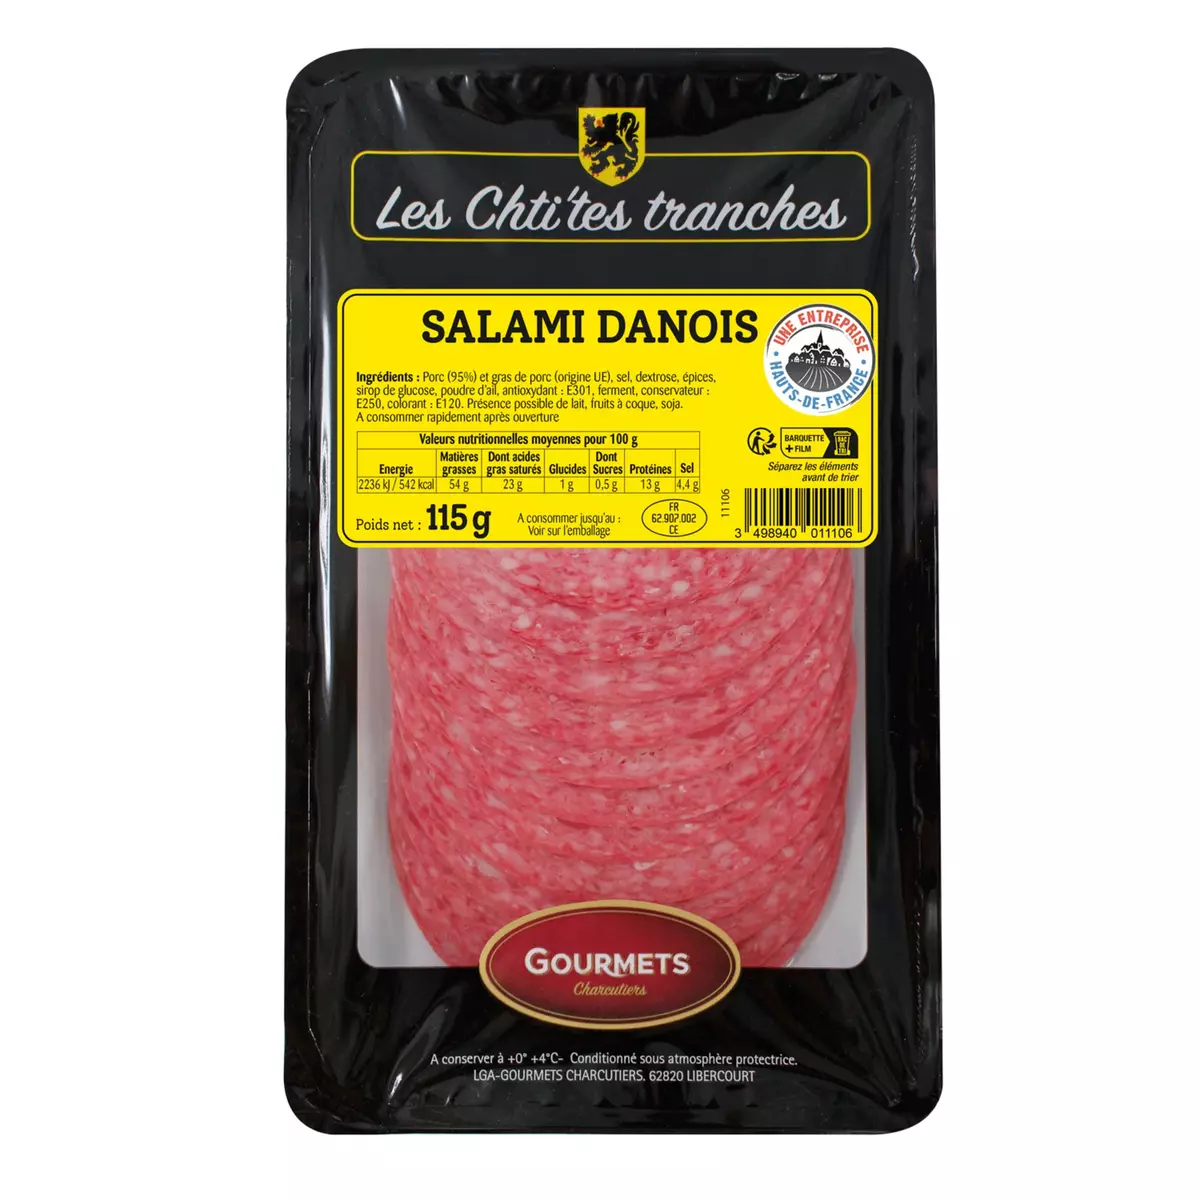 LES CHTI'TES TRANCHES Salami danois 12 tranches 115g